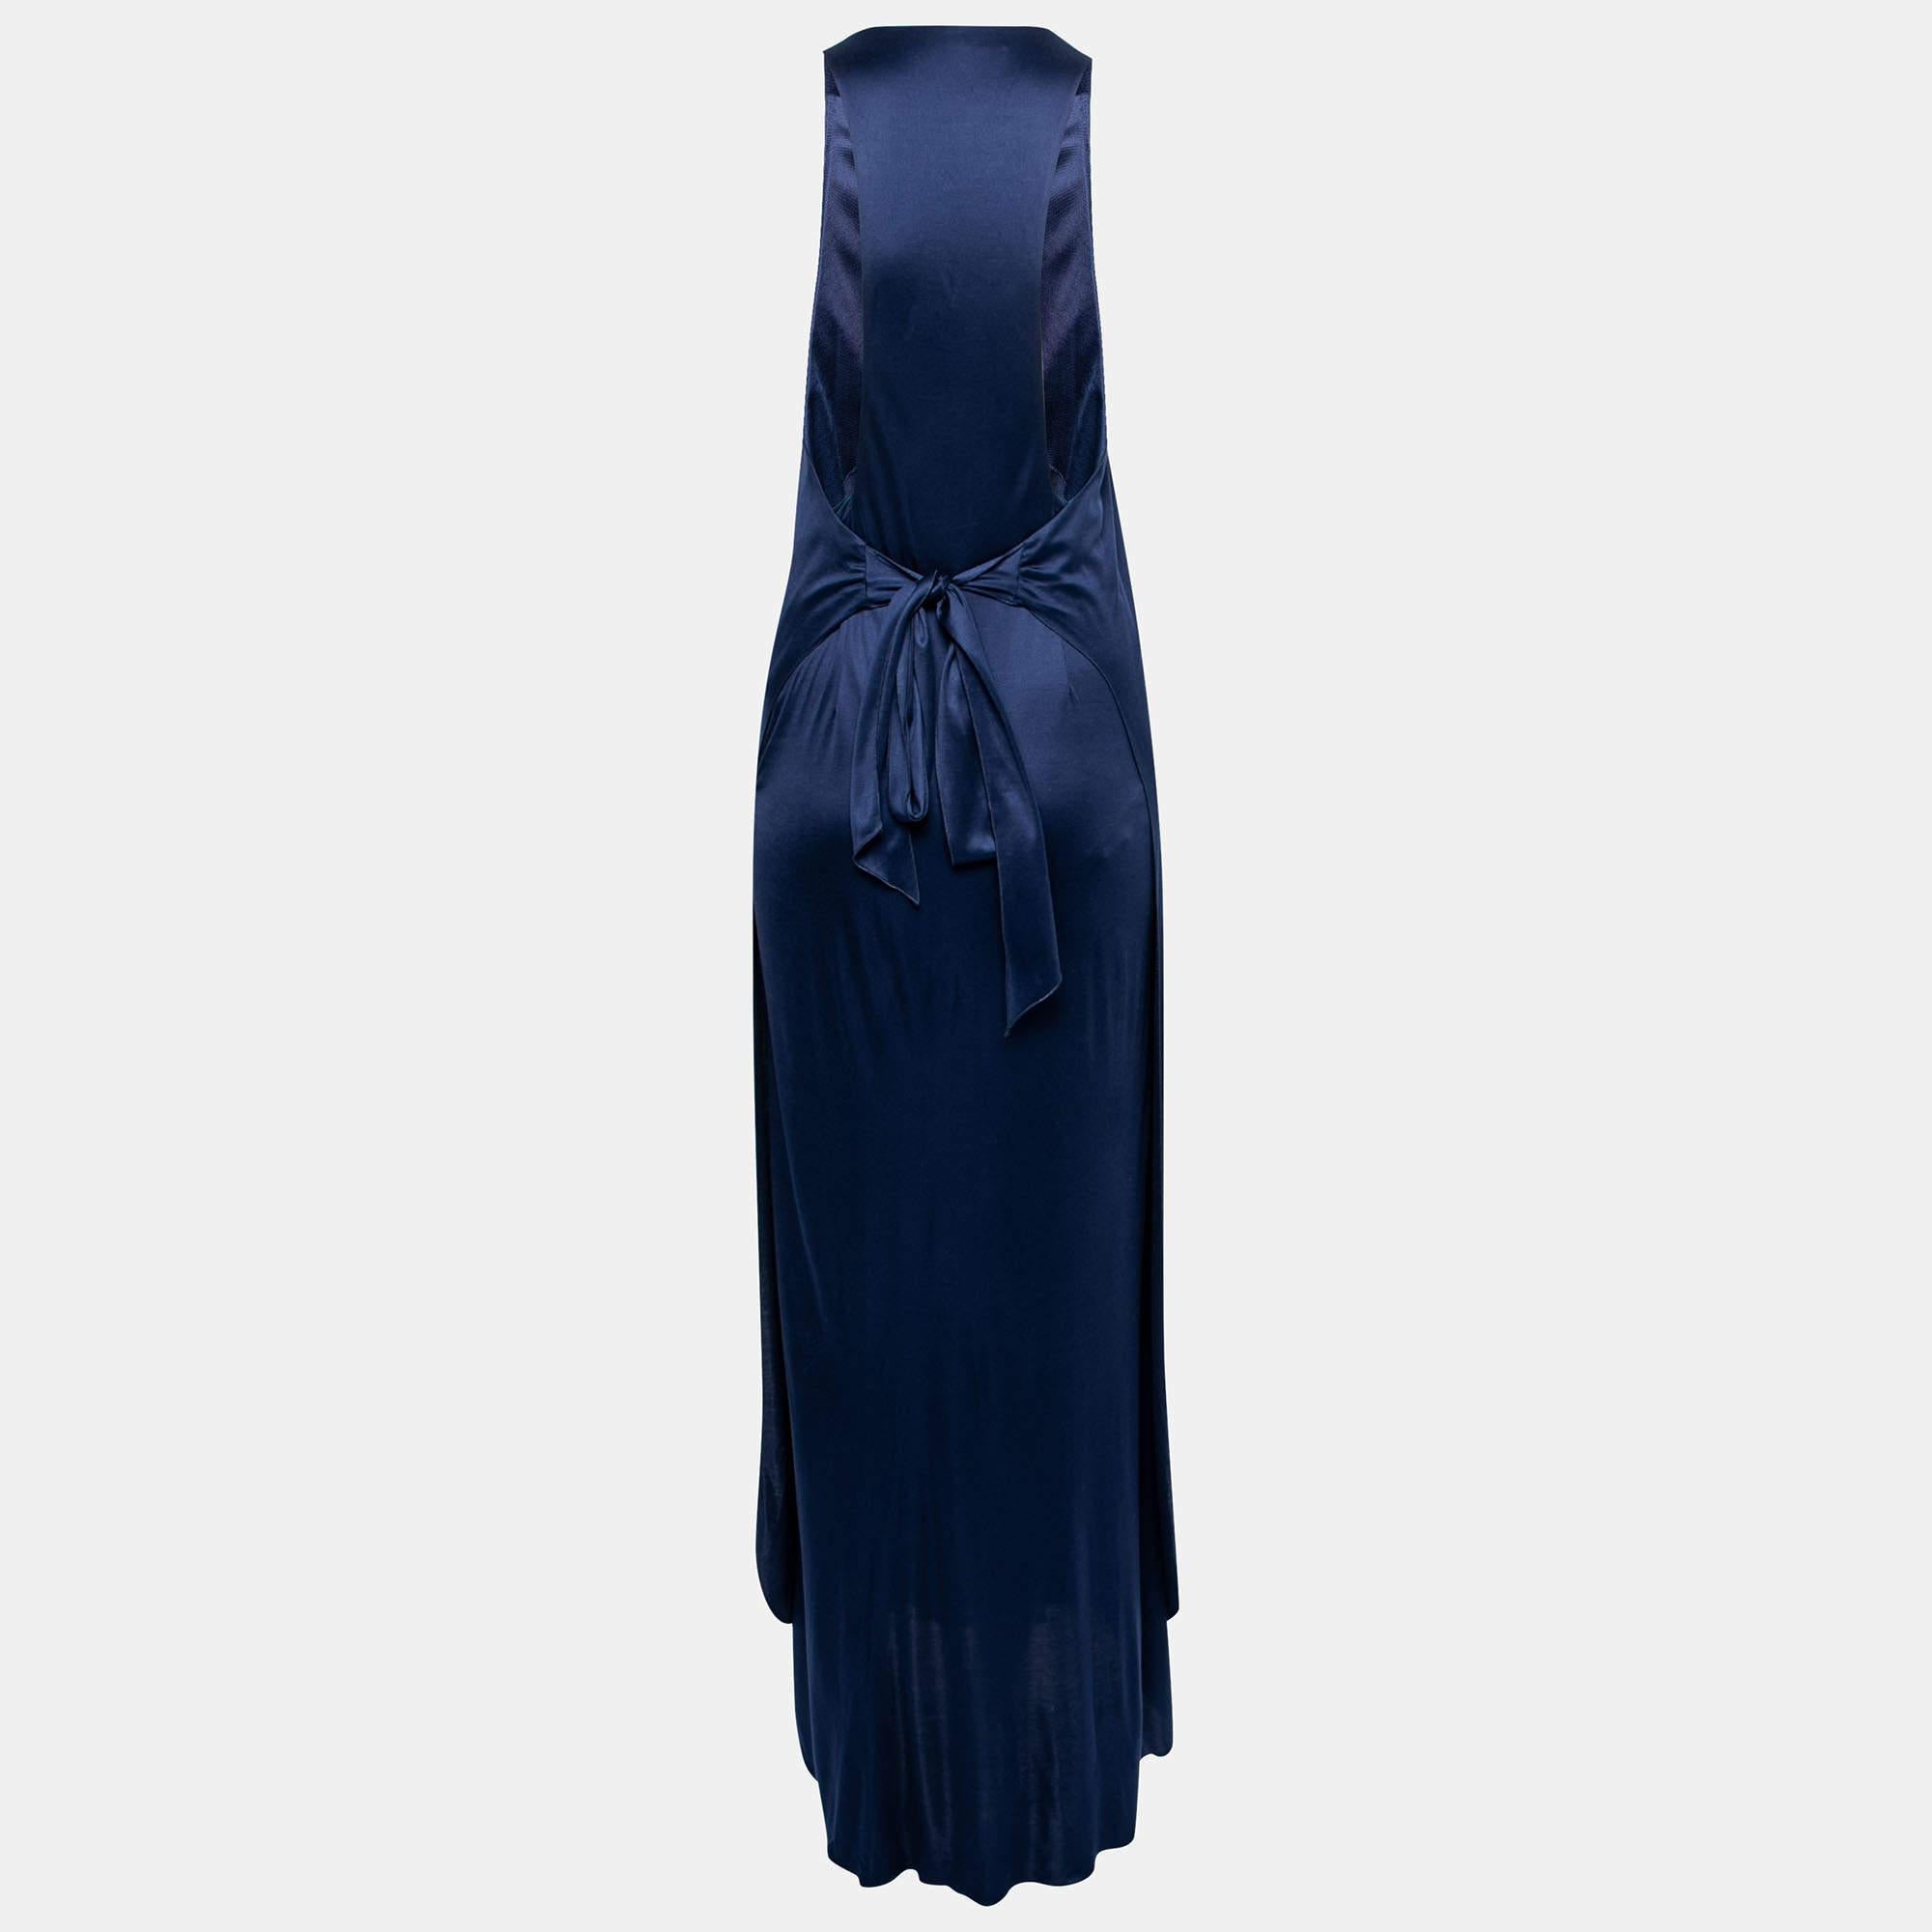 Designed by Yves Saint Laurent, this mesmerizing maxi dress will elevate your style in no time. It is brilliantly tailored using blue silk with layers enhancing its beauty. It embraces a flatteringly feminine silhouette making it an ideal pick for